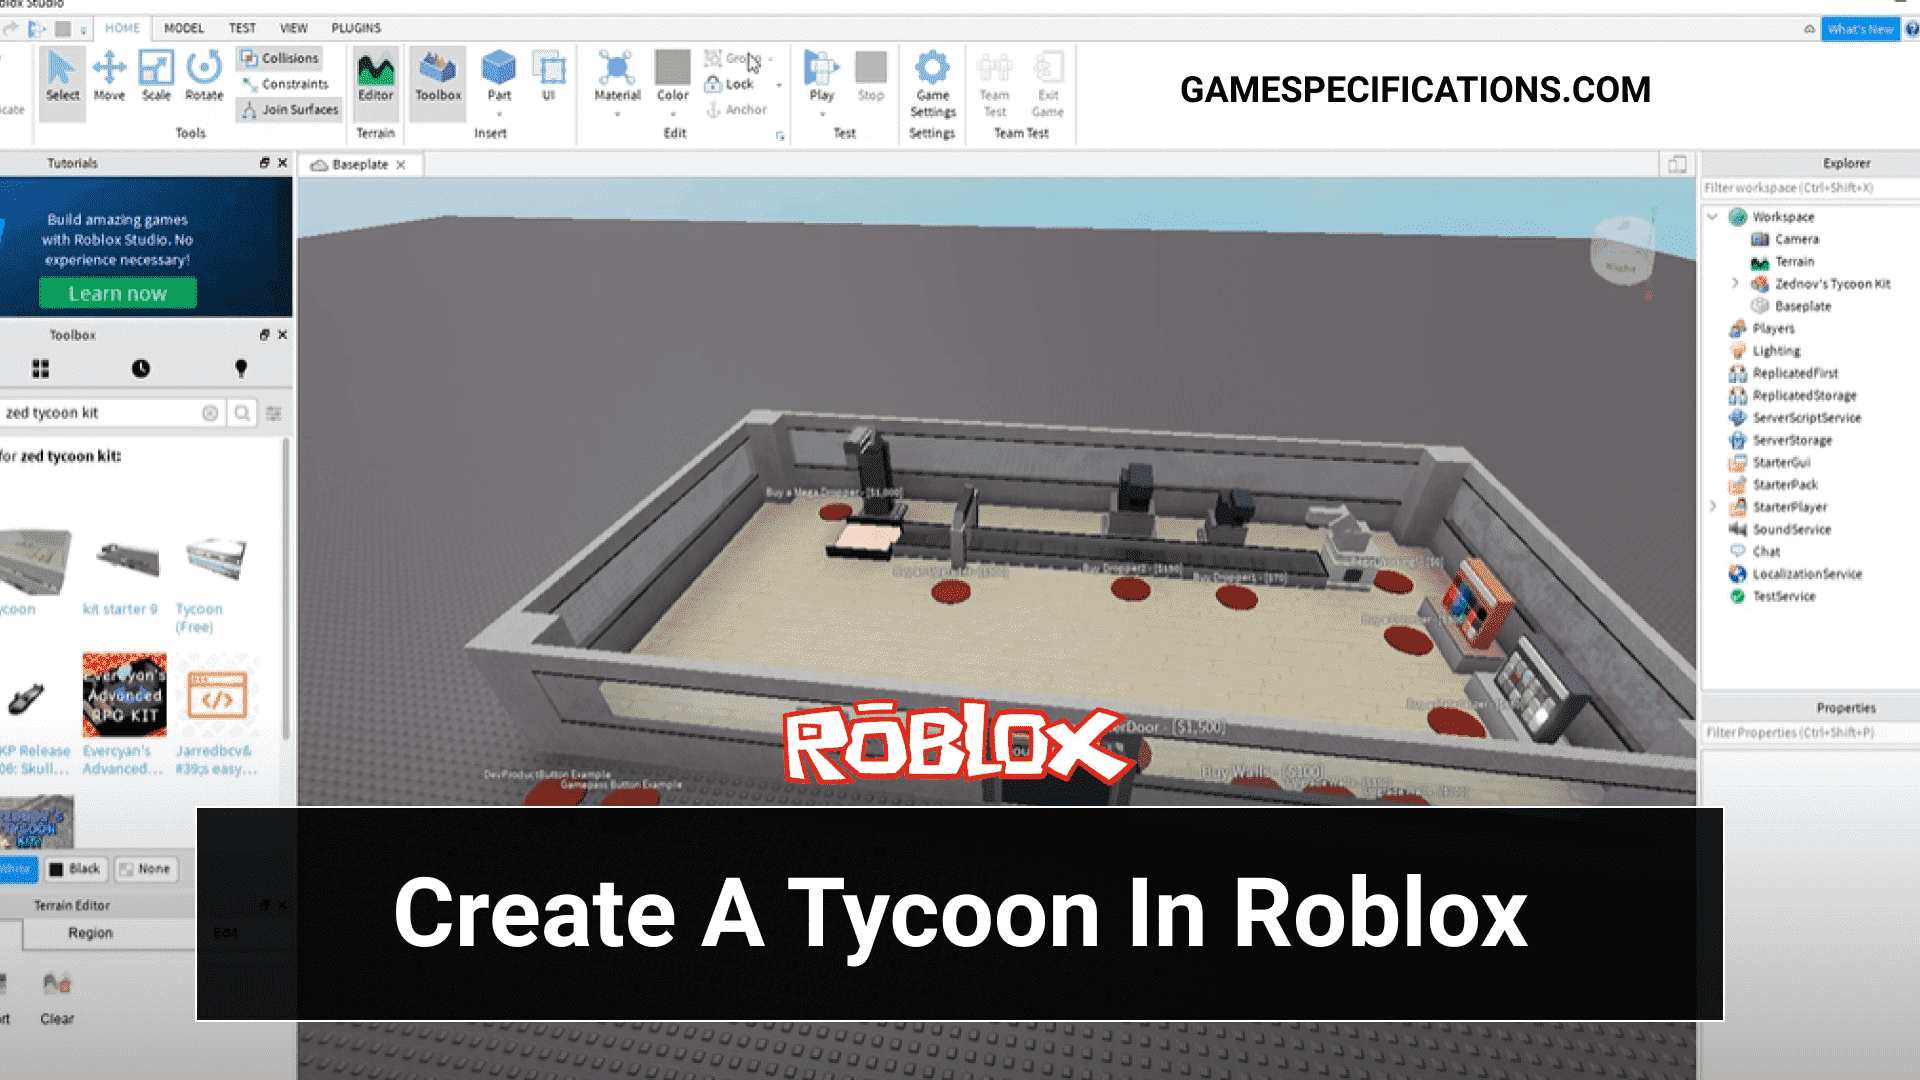 A Complete Guide On How To Make A Tycoon On Roblox?